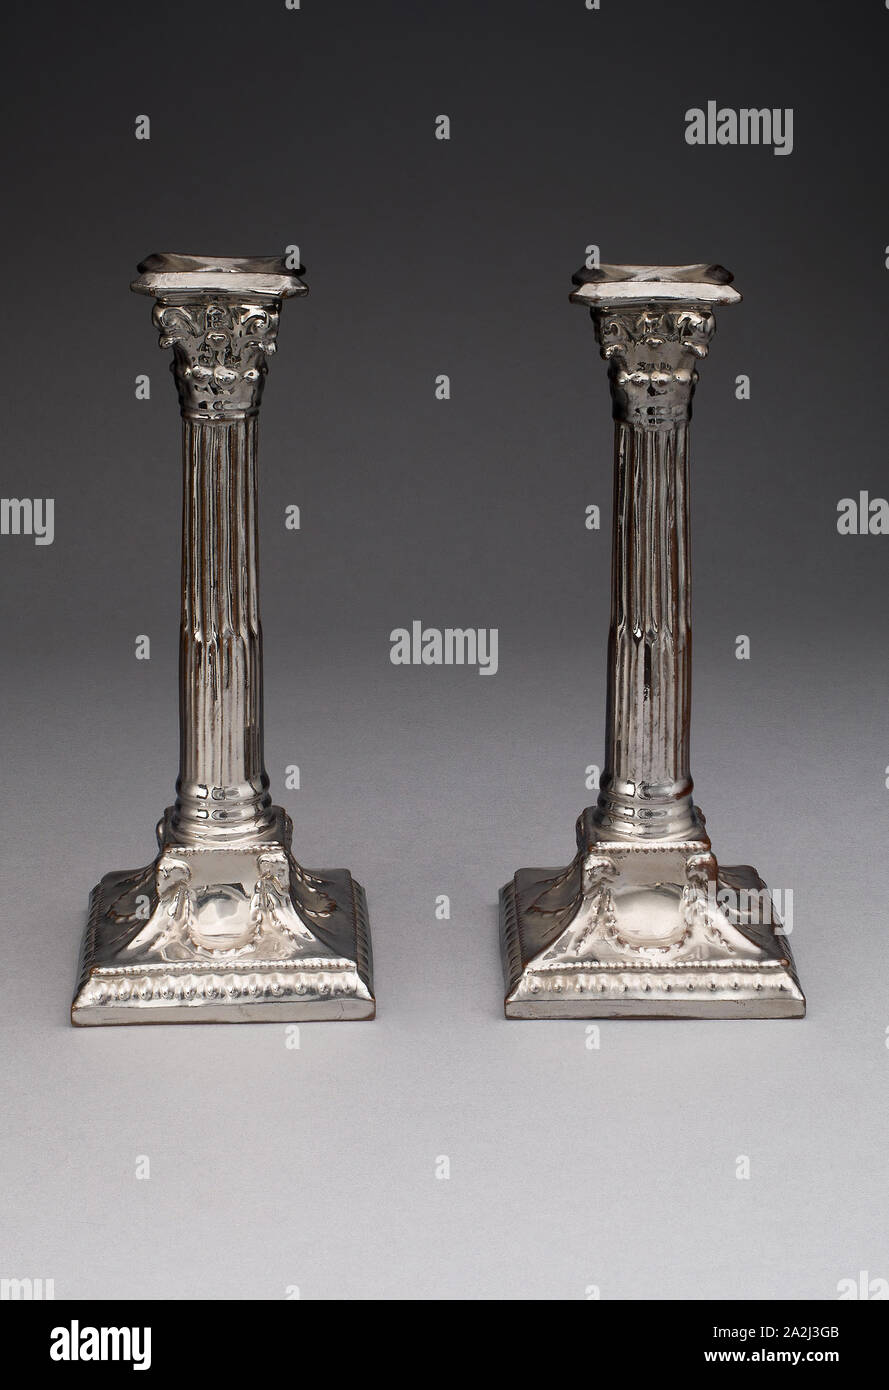 Candlestick (one of a pair), 1810/20, England, Staffordshire, Staffordshire, Lead-glazed earthenware with lustre decoration, H. 21.6 cm (8 1/2 in Stock Photo